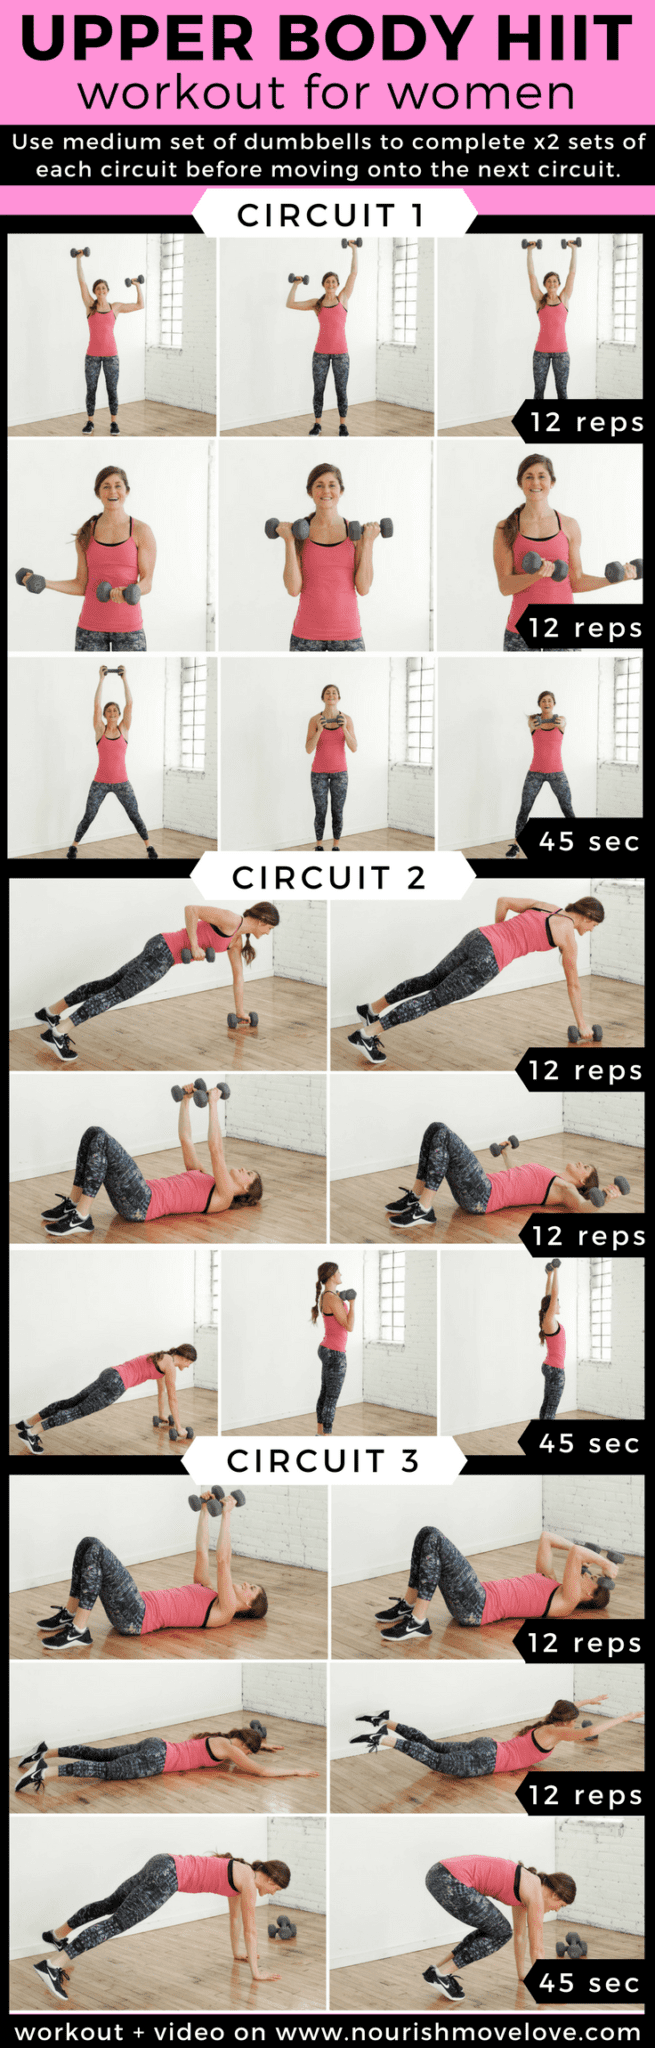 Upper Body HIIT Workout for Women | Nourish Move Love